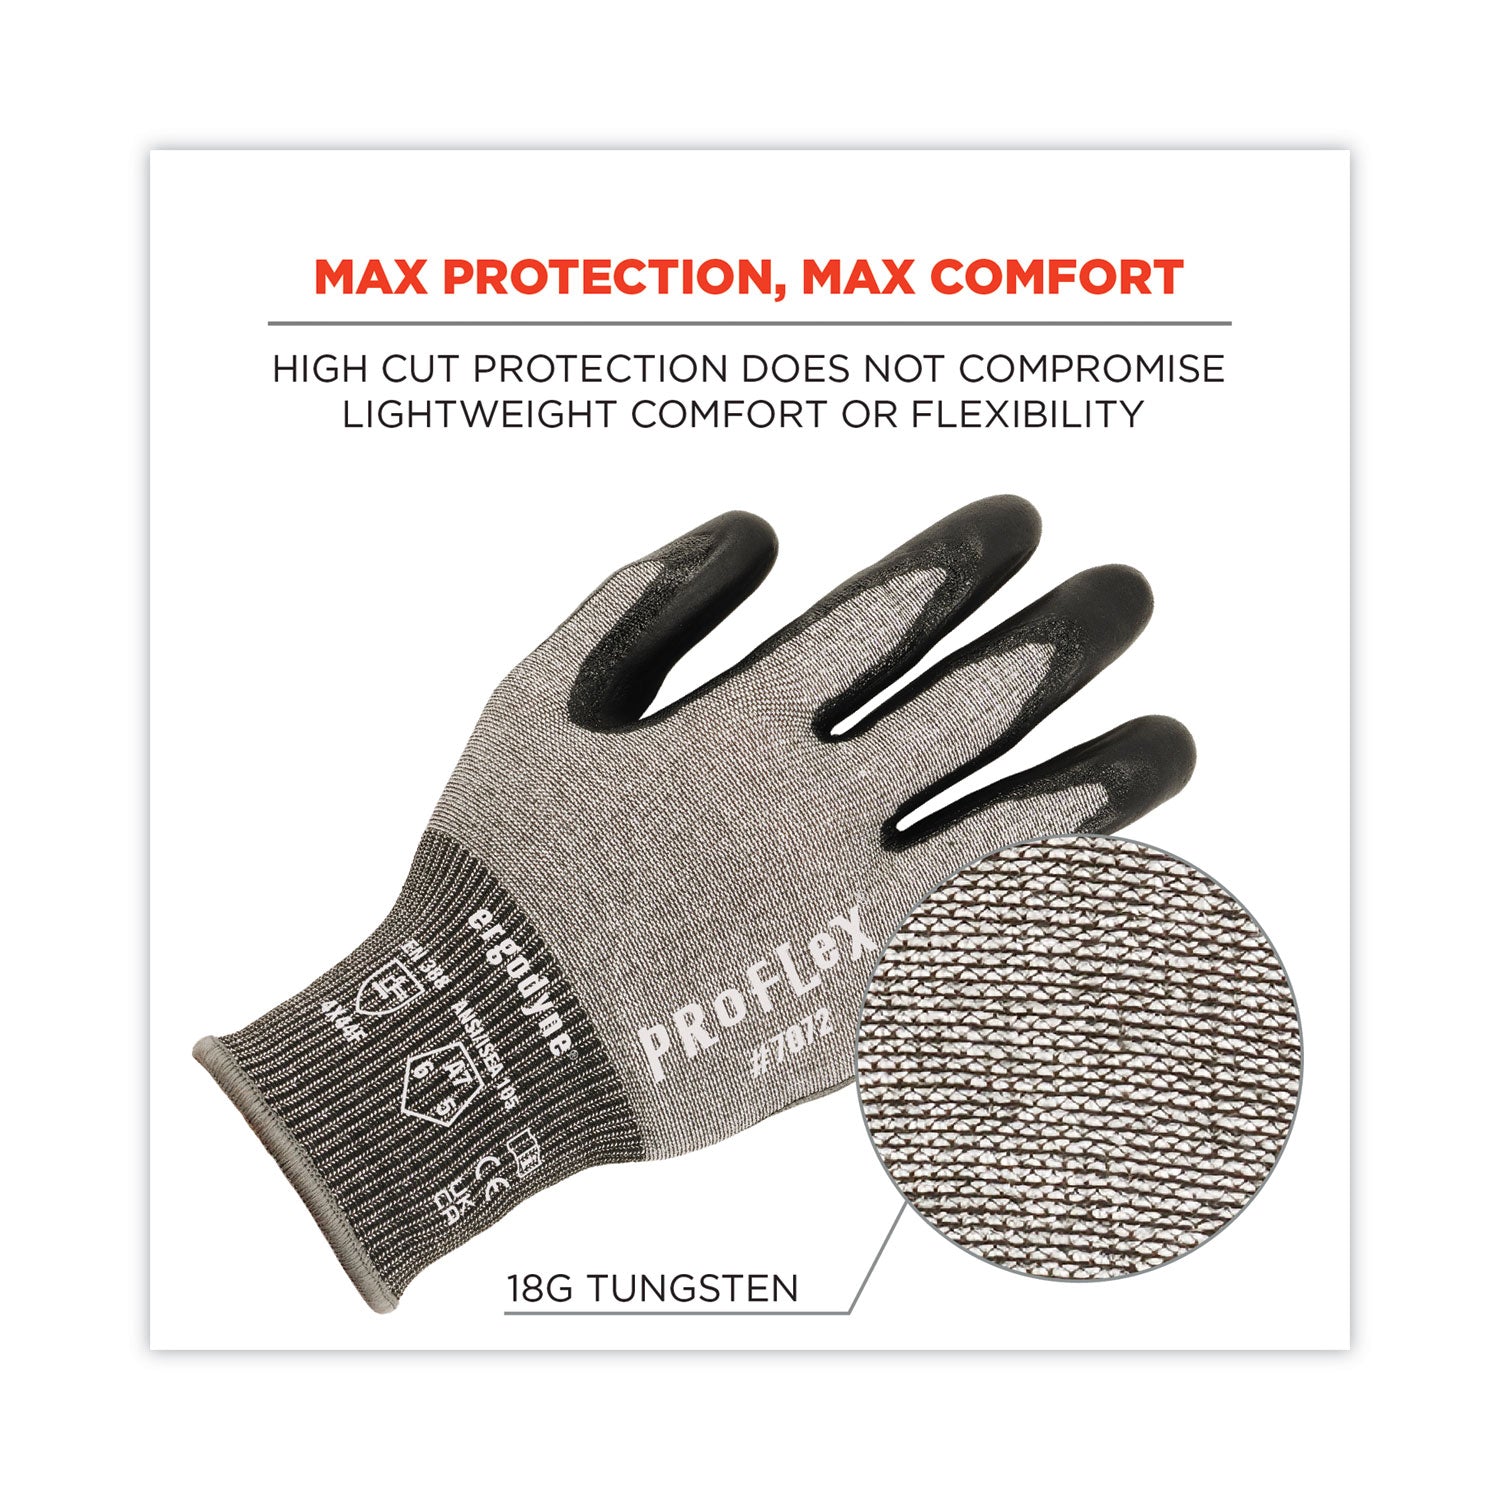 proflex-7072-ansi-a7-nitrile-coated-cr-gloves-gray-medium-12-pairs-pack-ships-in-1-3-business-days_ego10303 - 7